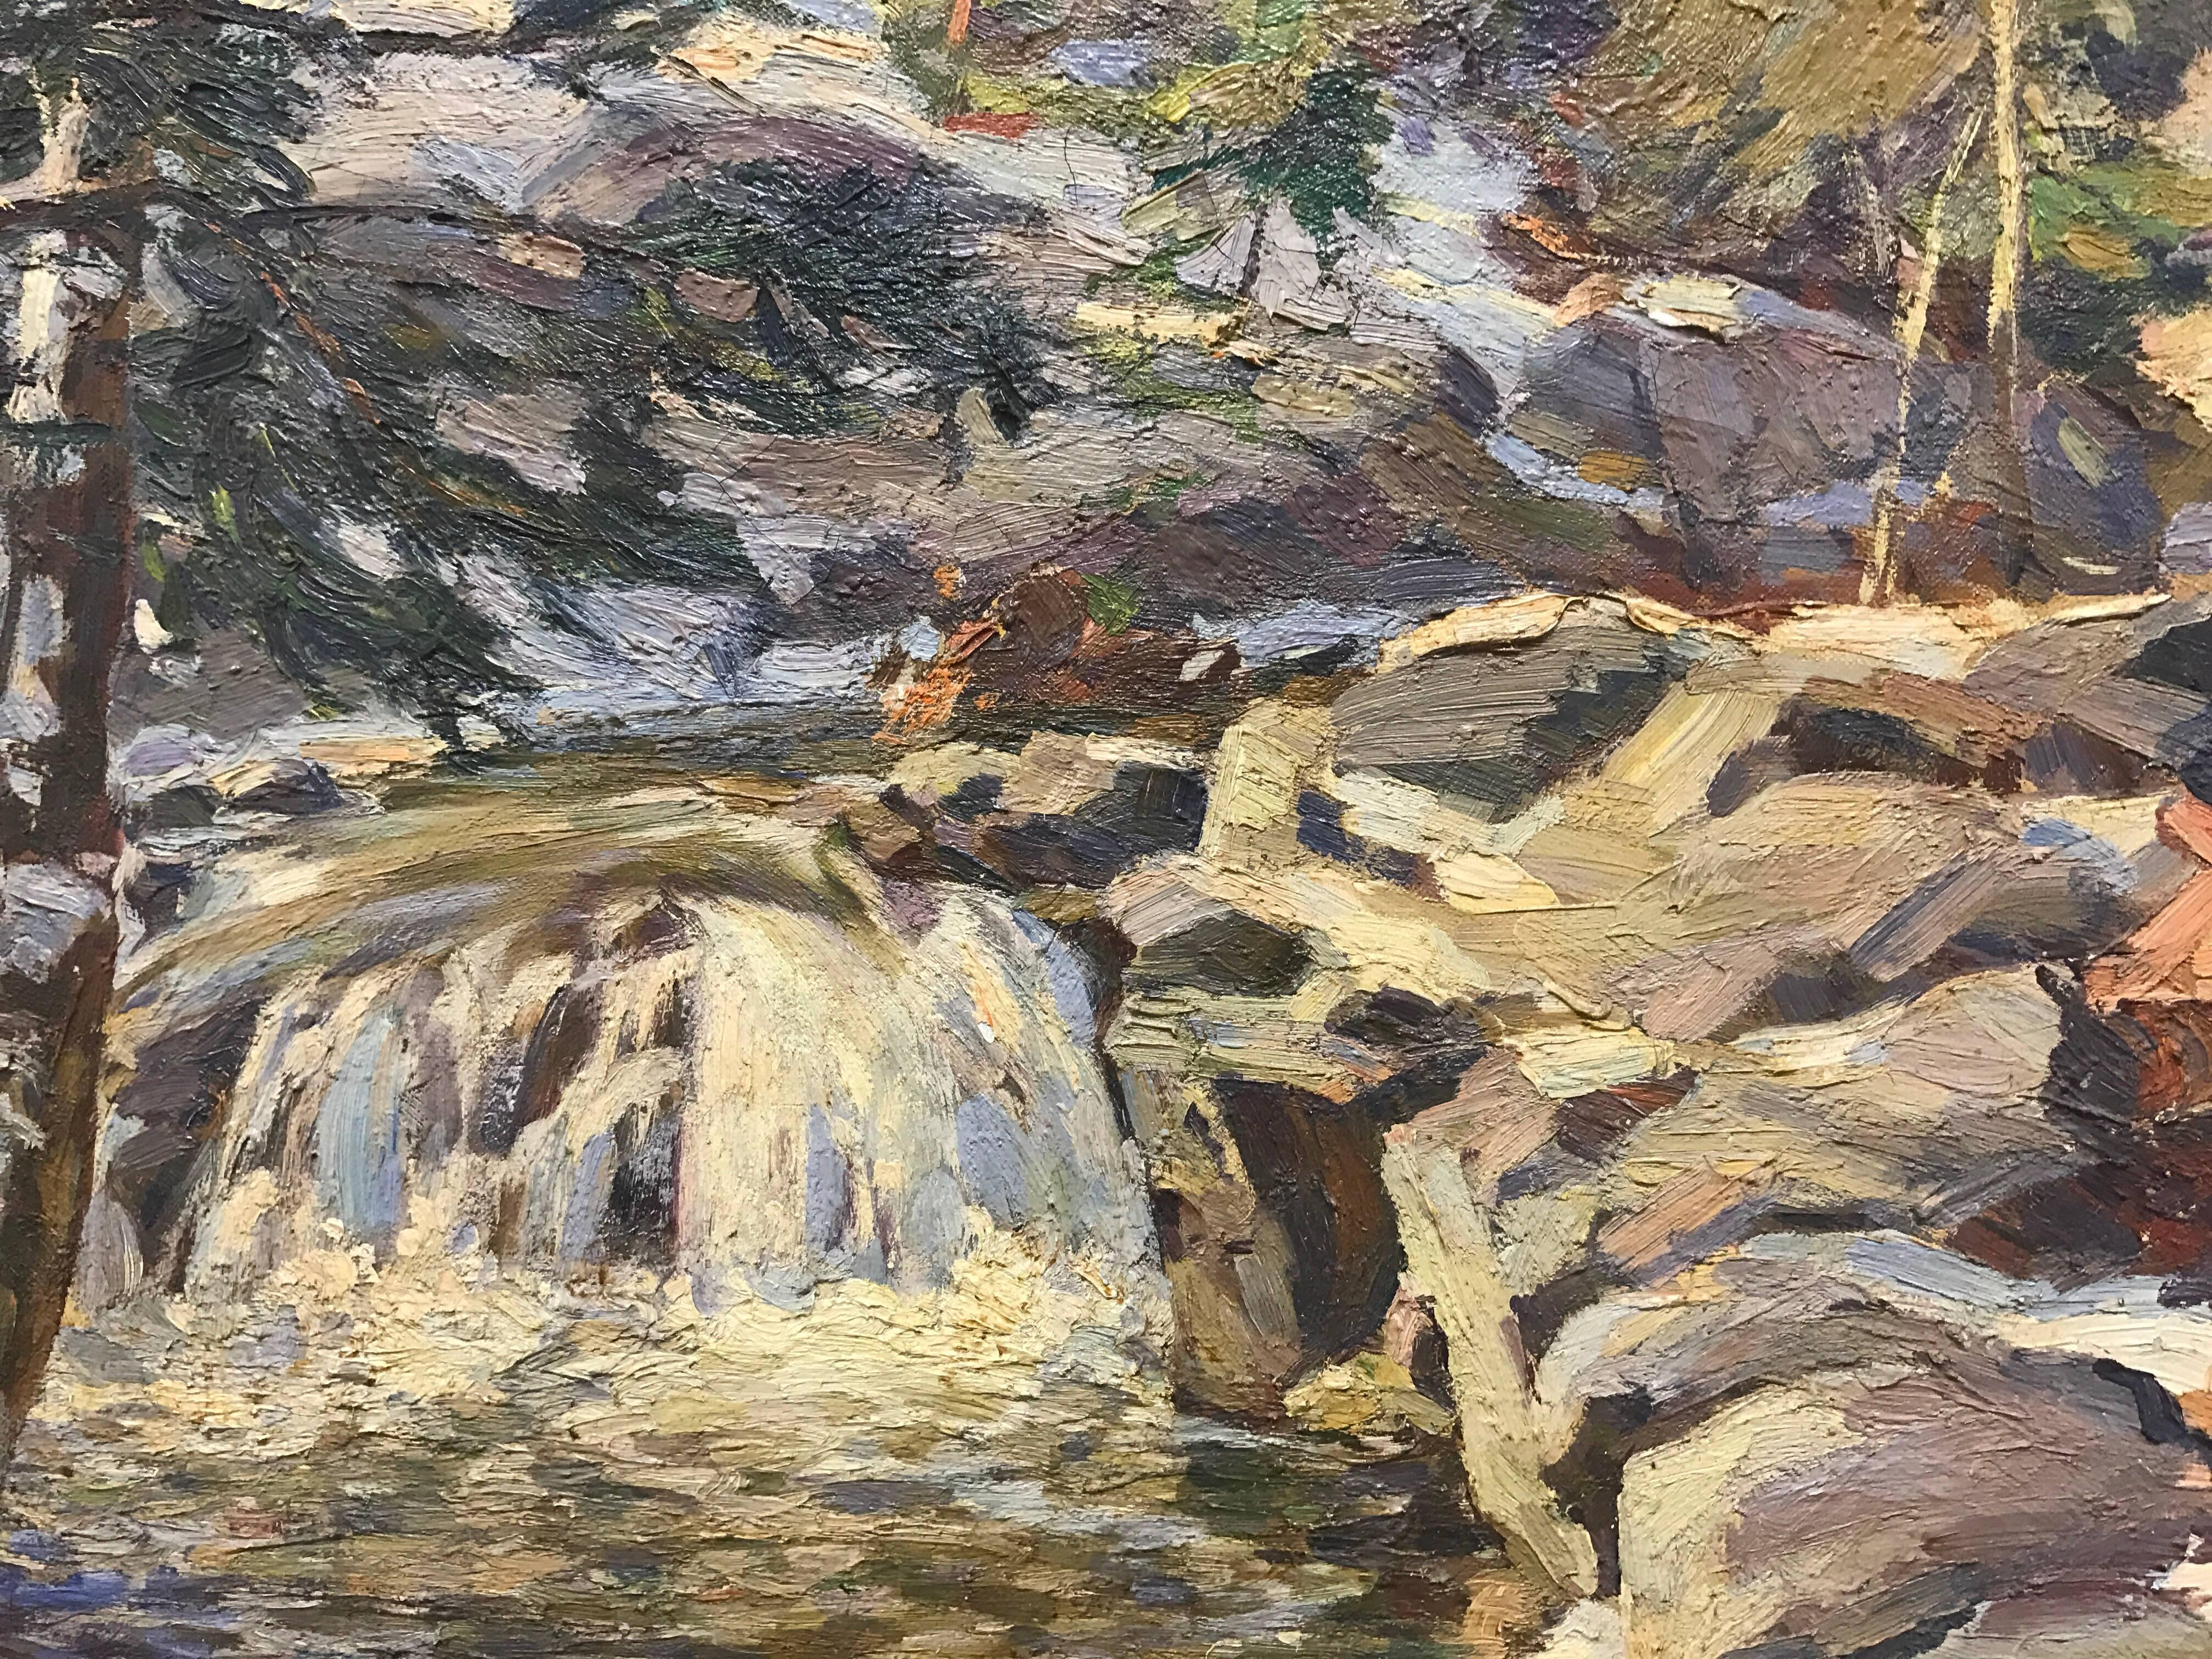 Original oil painting of a small New England waterfall scene by Frederick Lester Sexton (1889 - 1975),  one of the unsung heroes of Connecticut Regionalism.  He was a master painter whose work was widely exhibited and favorably reviewed for five